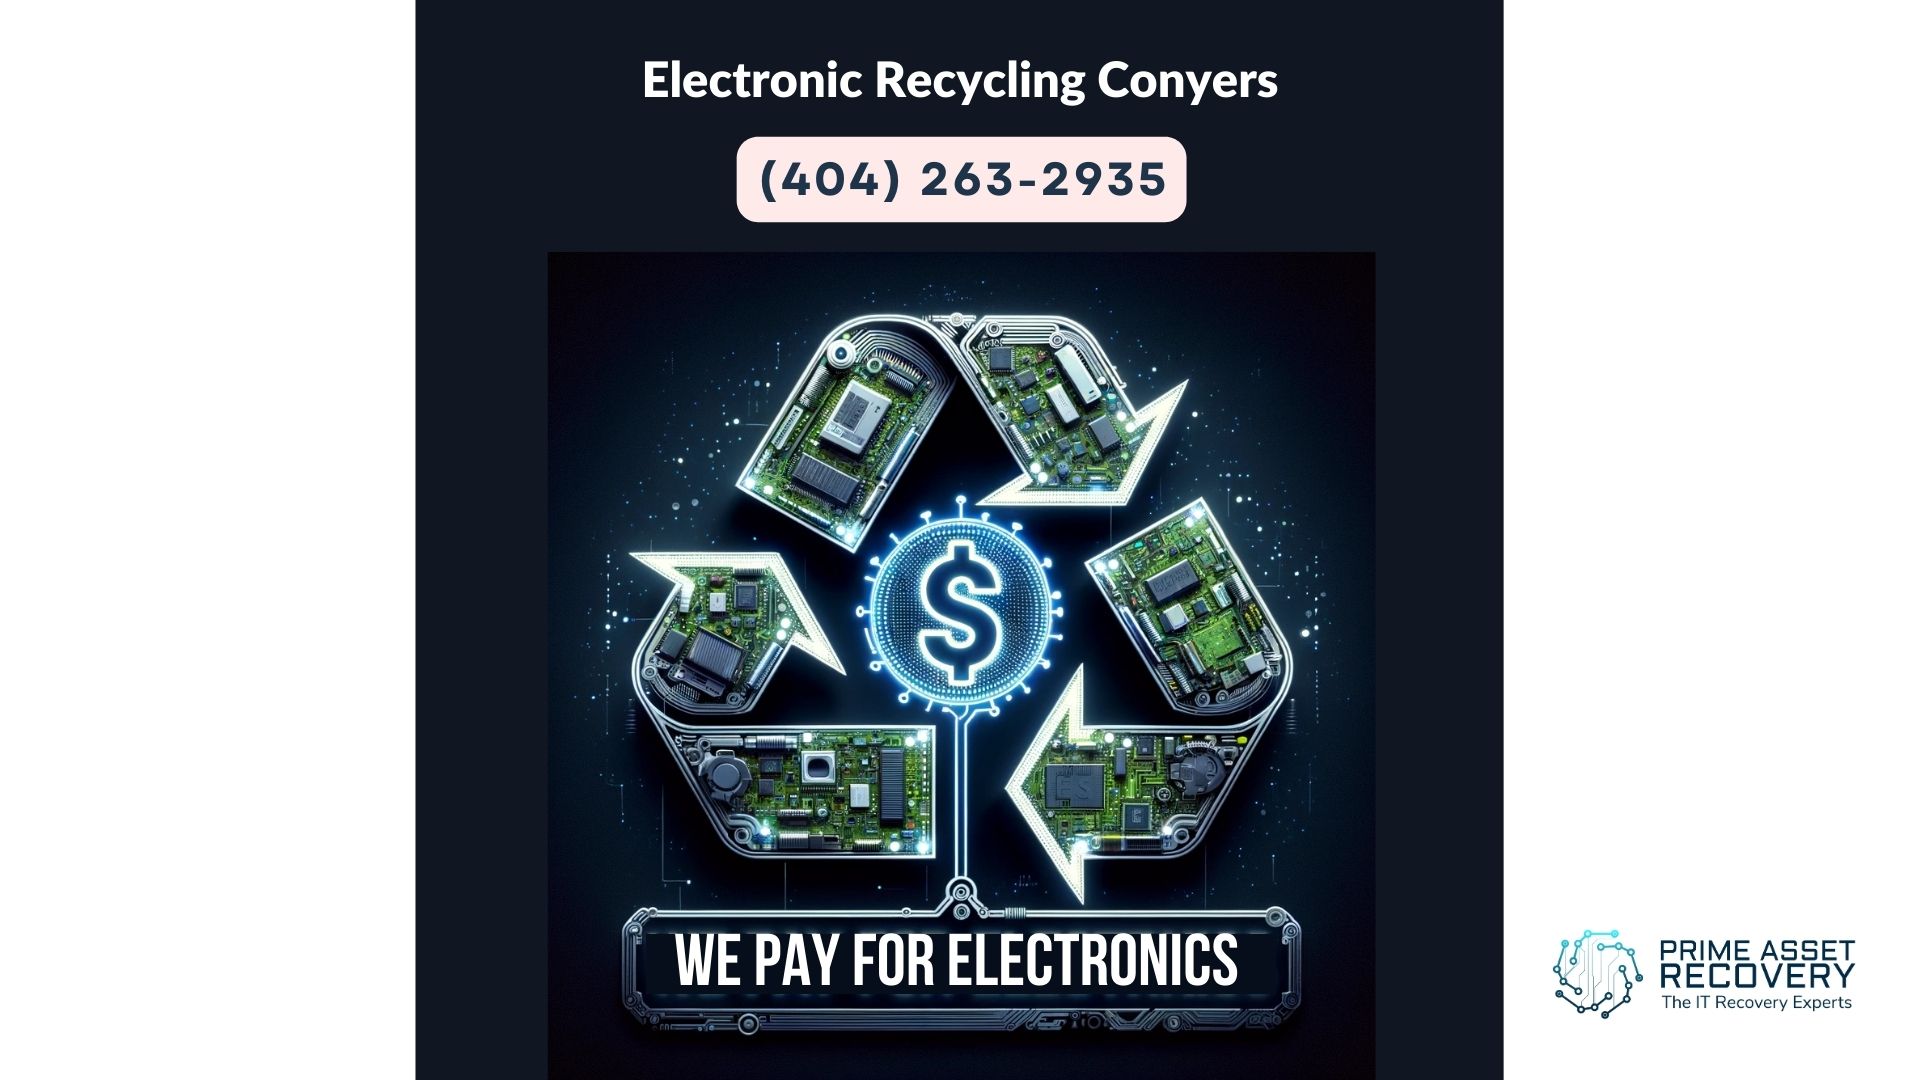 Computer Electronic Recycling Conyers - Prime Asset Recovery Your Partner in Responsible Electronics Recycling